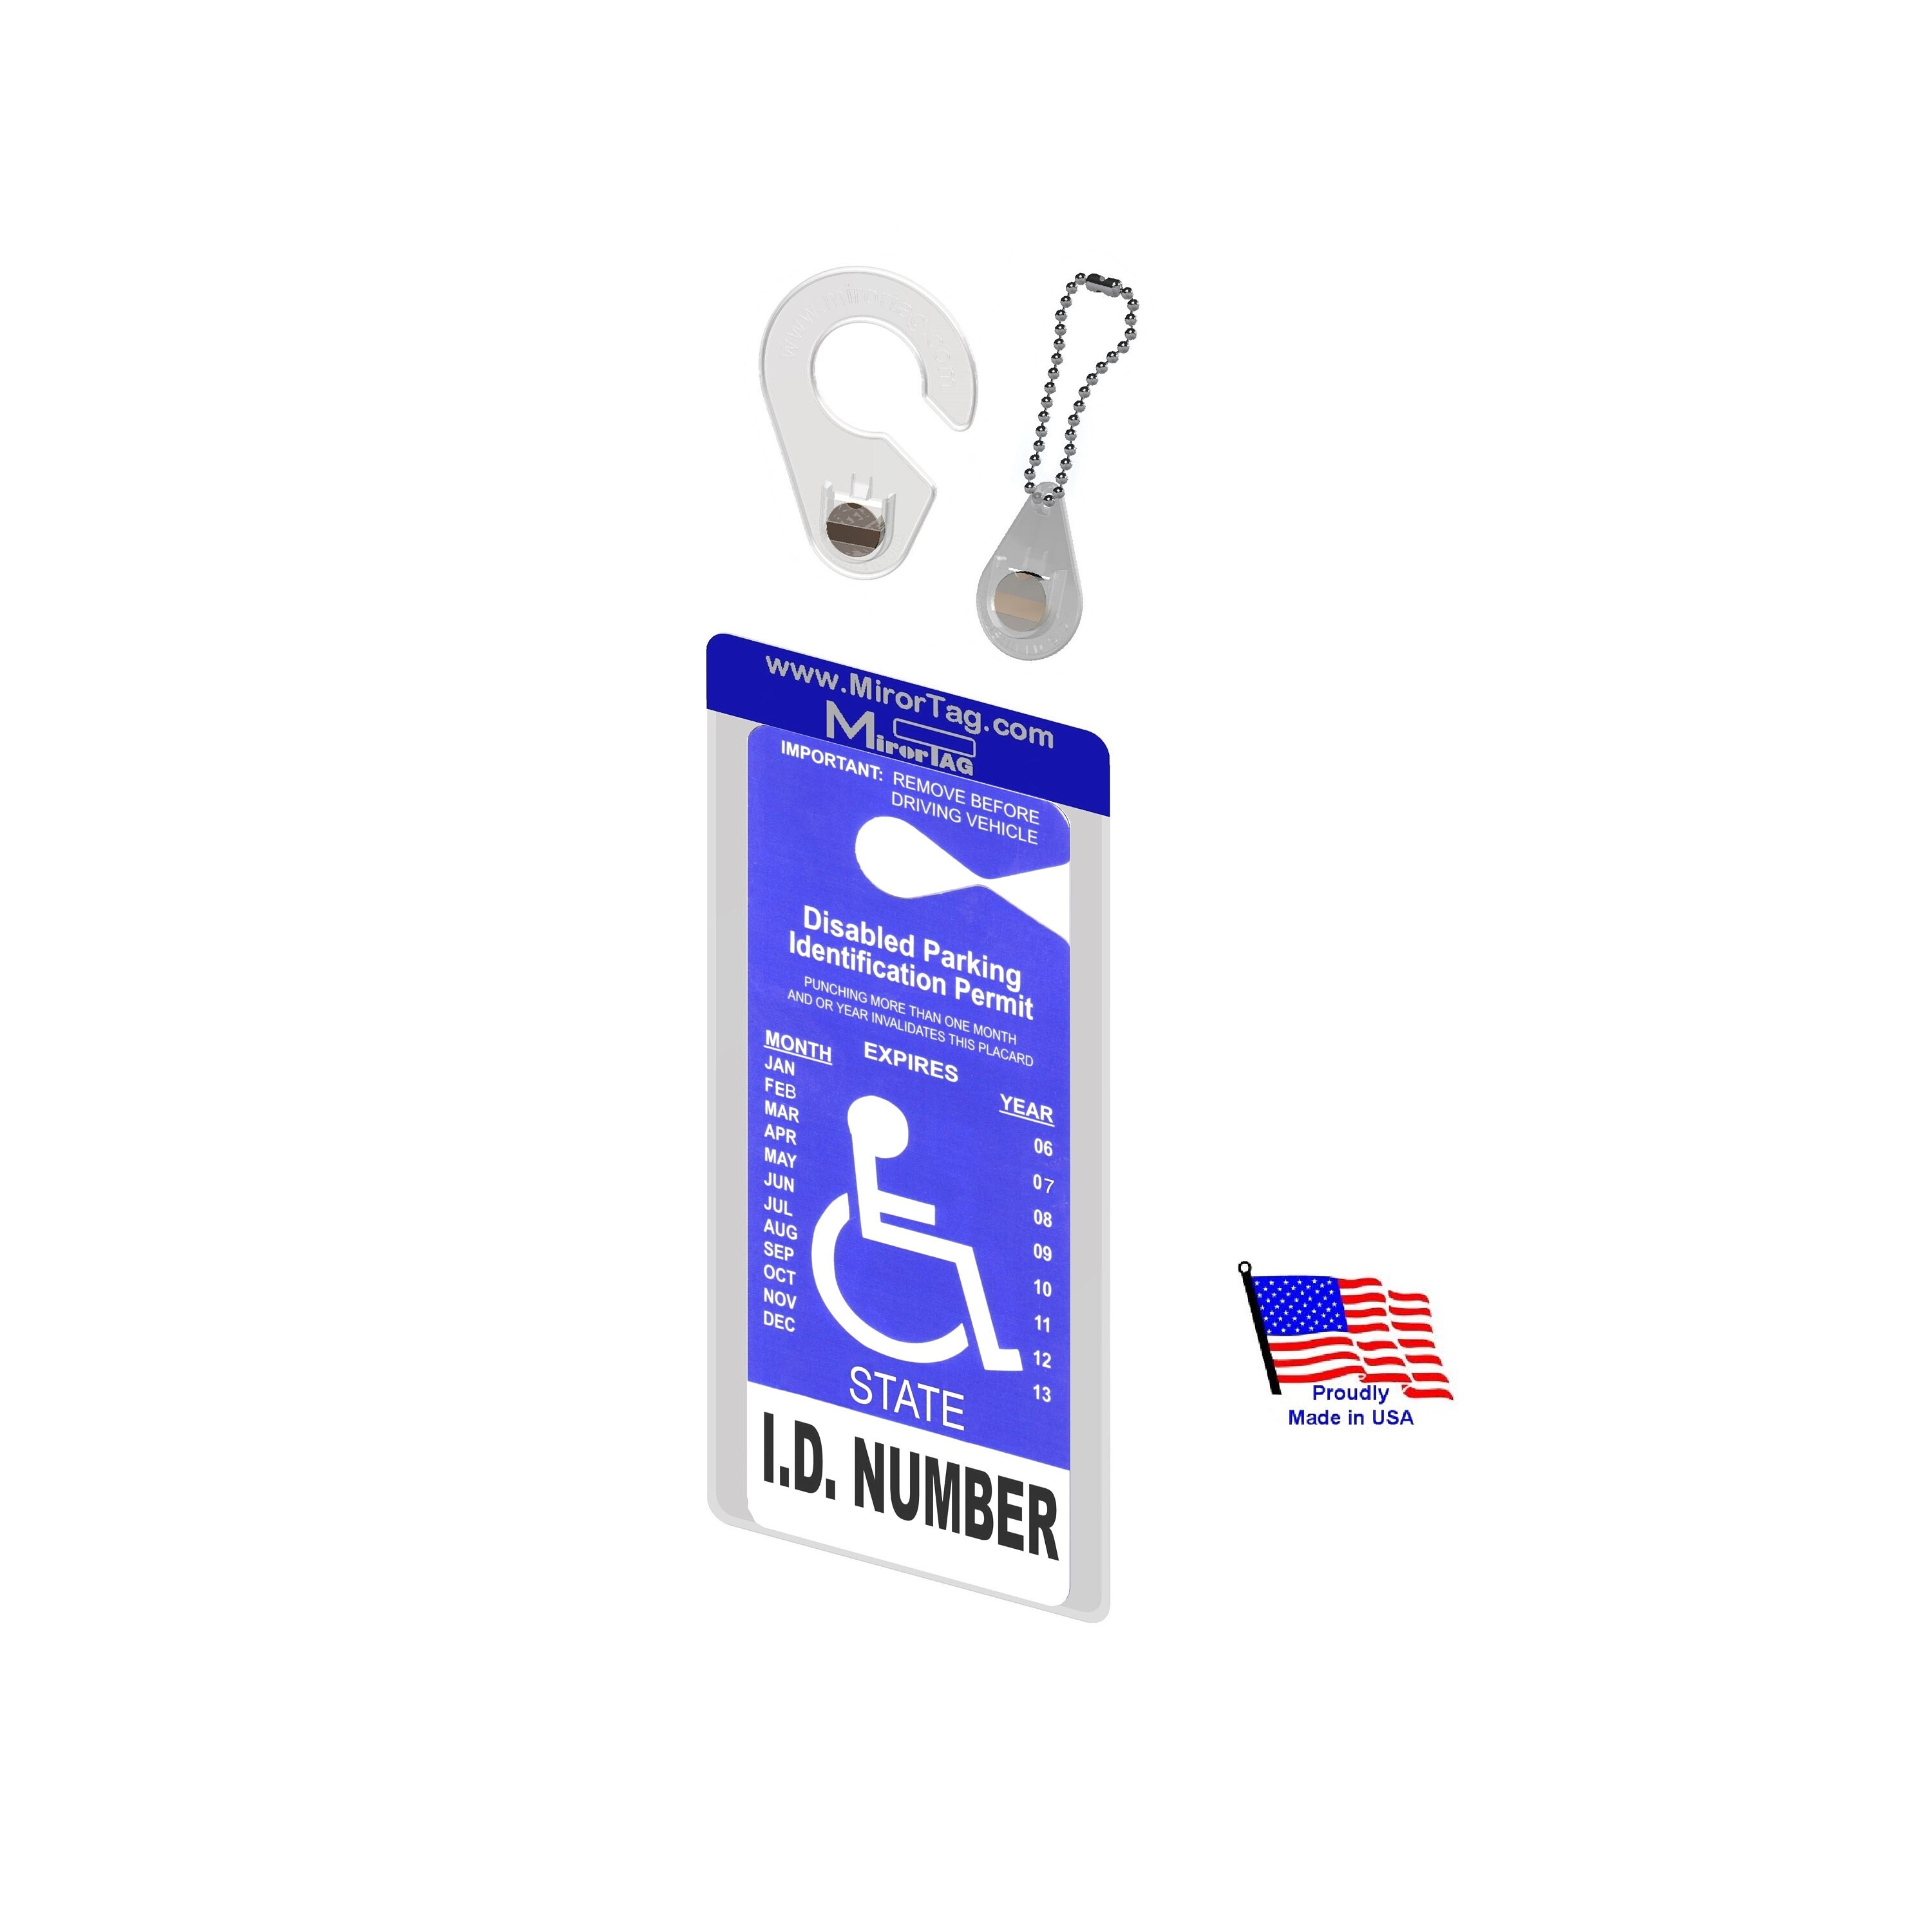 Mirortag Holder With 1 Hook & 1 Charm Handicap Placard Holder and  Protector. Magnetically Attach / Detach Your Parking Placard. Made in USA 